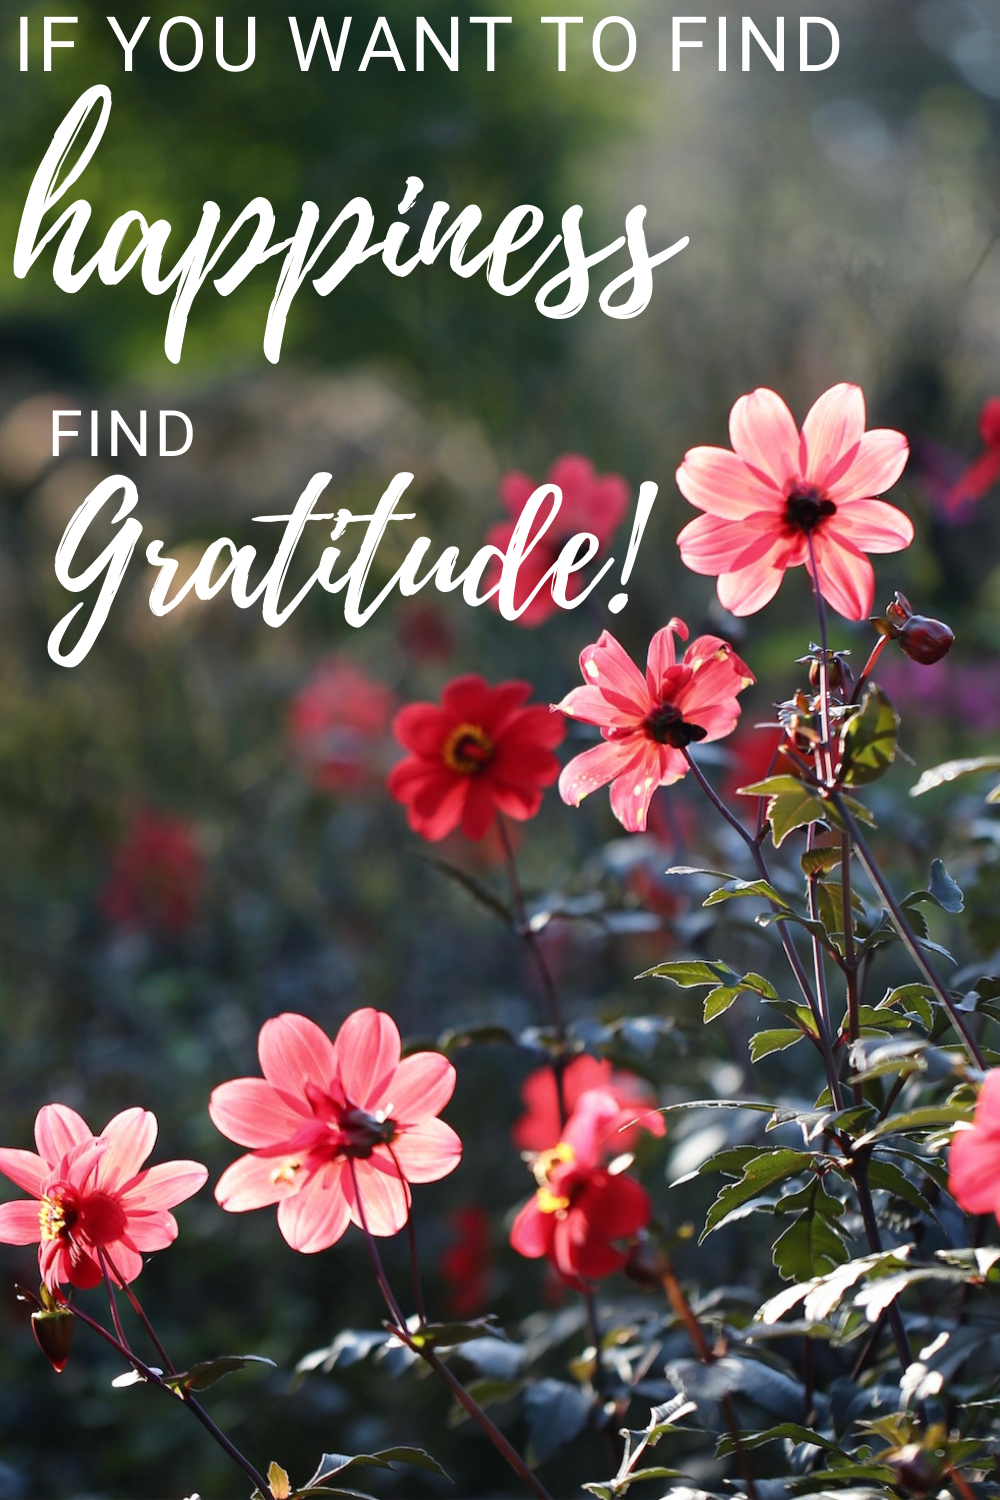 if you want to find happiness- find gratitude- anita nowinska